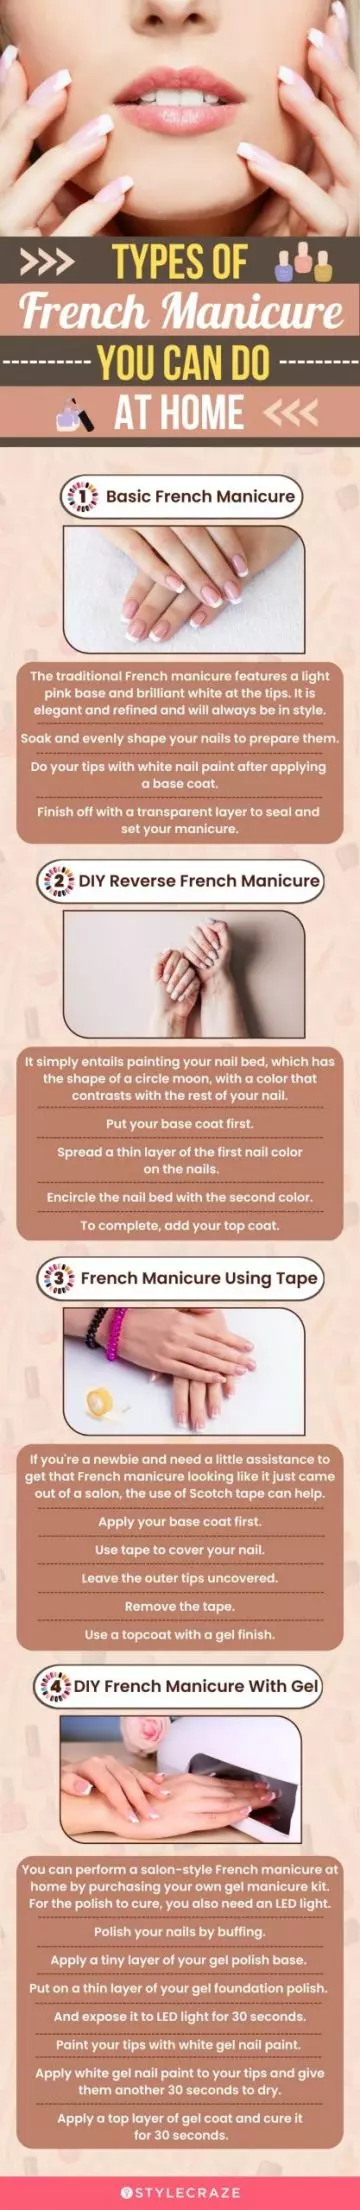 types of french manicure you can do at home (infographic)